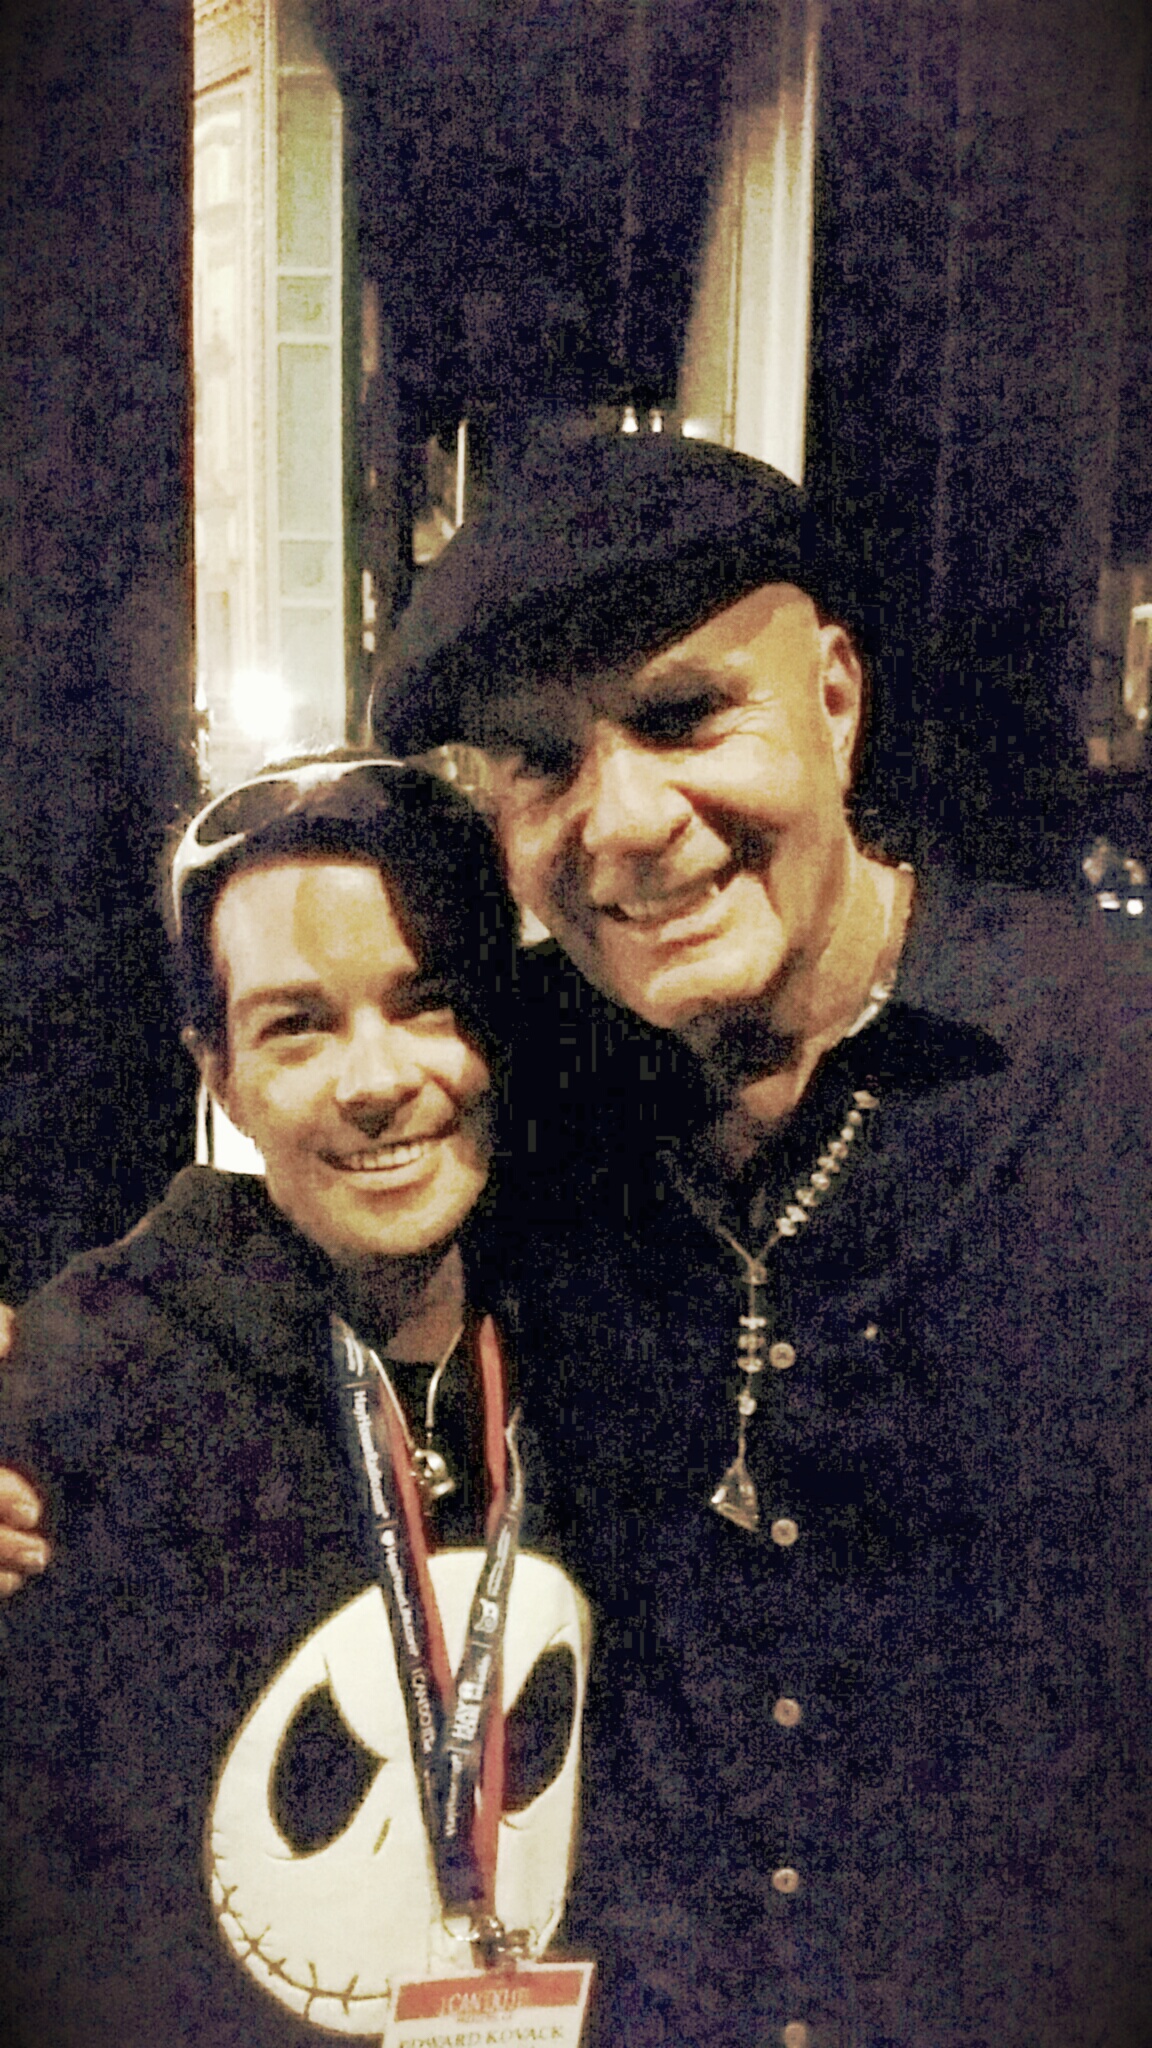 With @DrWayneWDyer on the right, I to the left. In Pasadena,CA